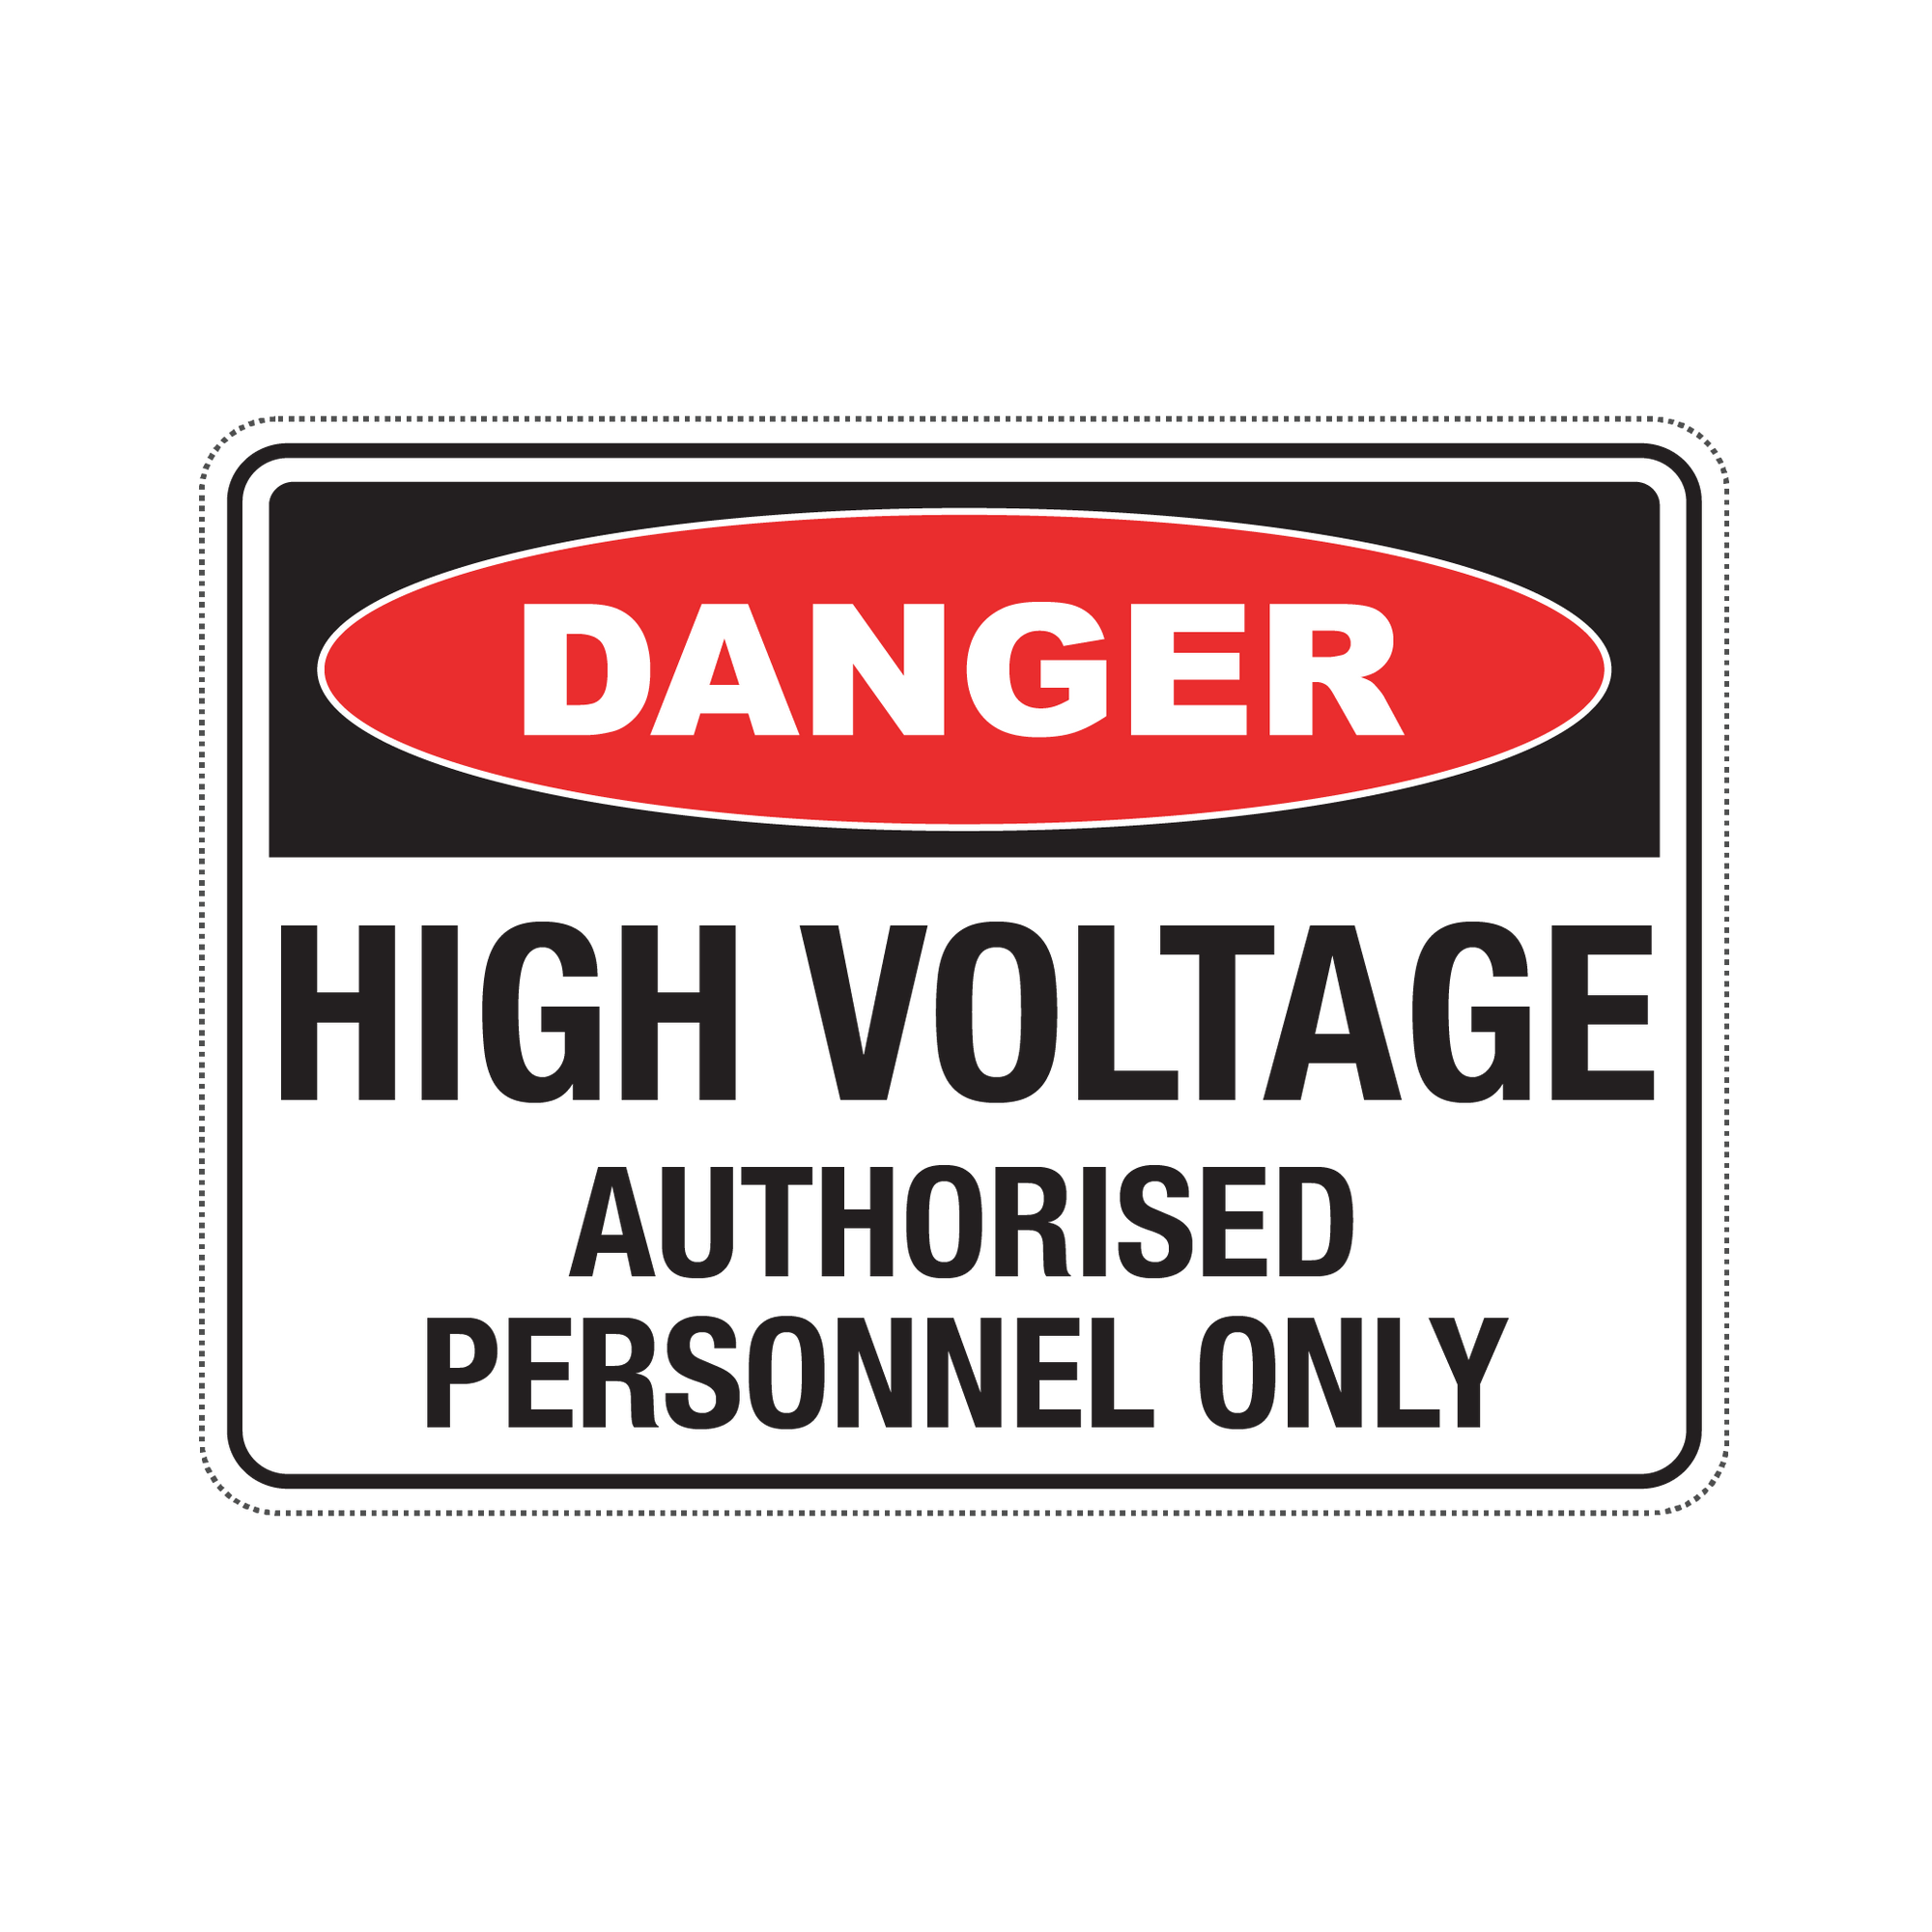 DANGER HIGH VOLTAGE AUTORISED PERSONNEL ONLY - S13